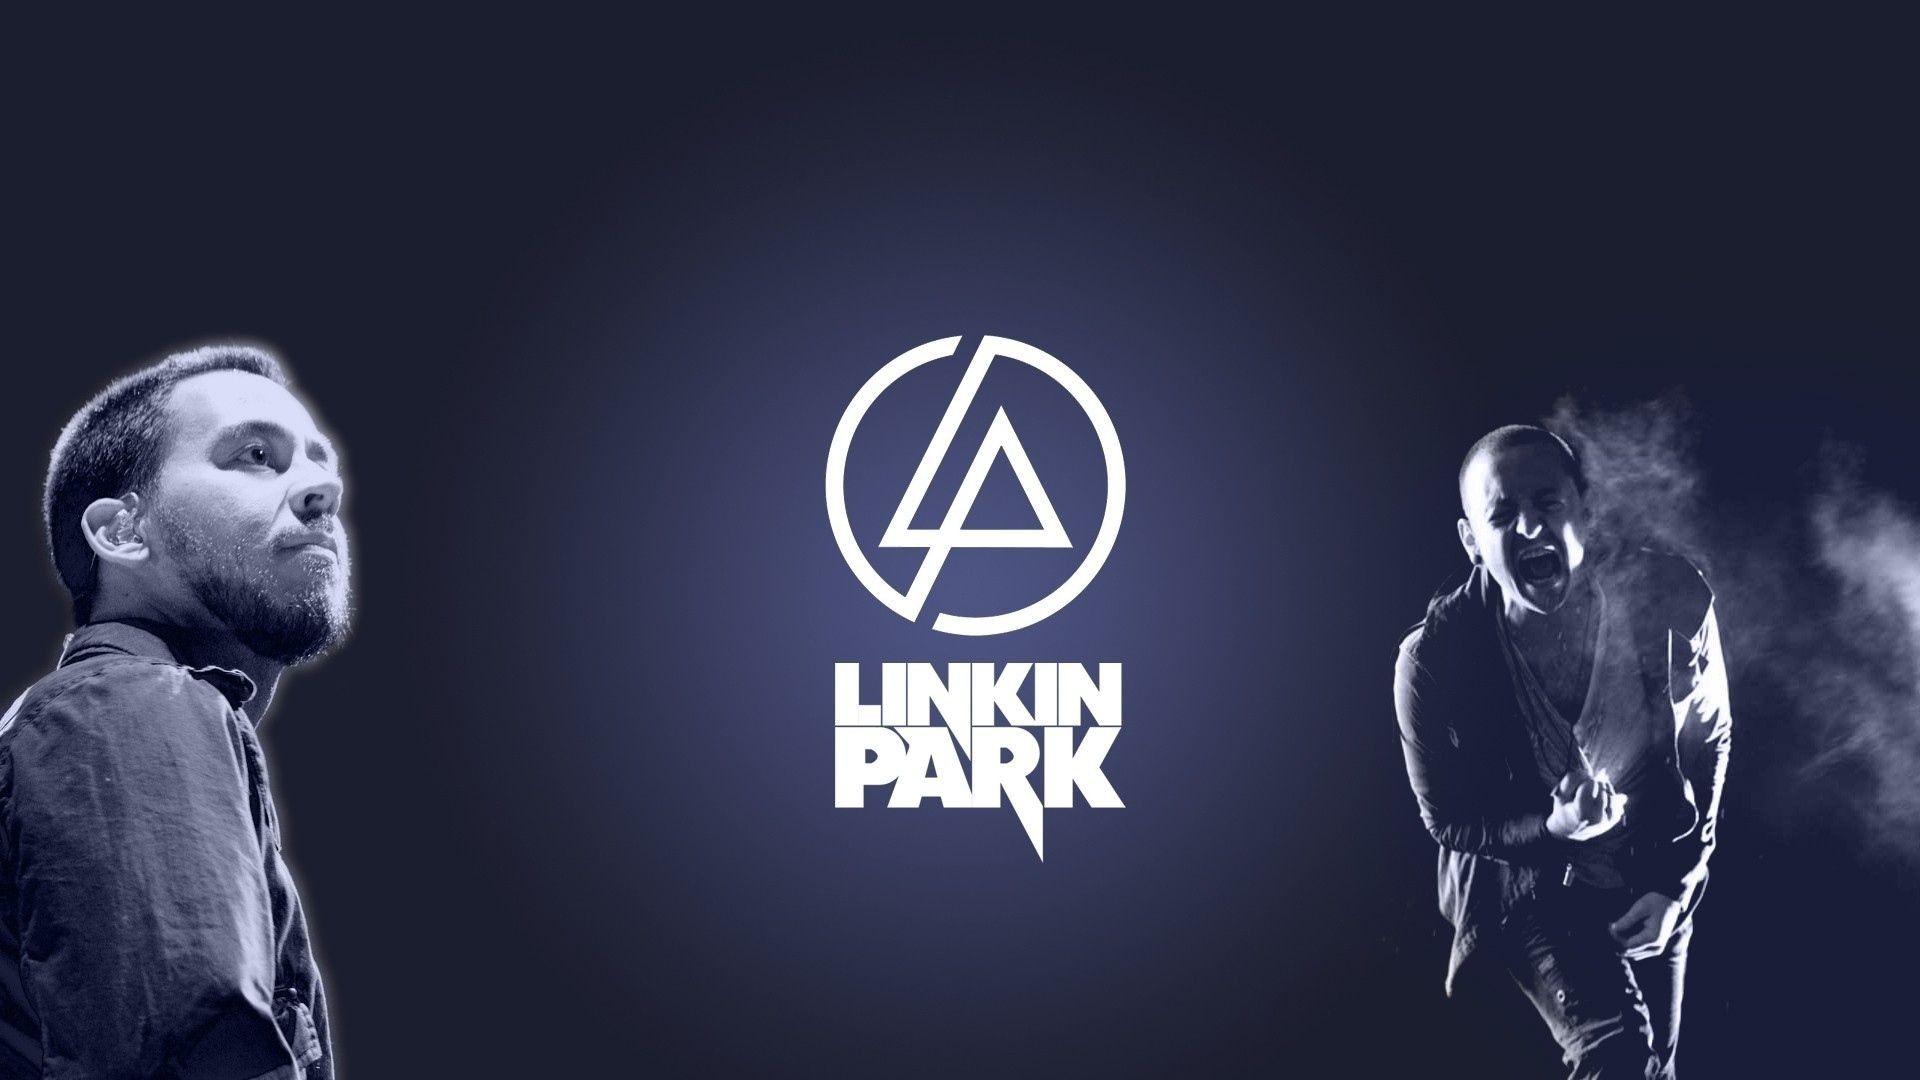 Linkin Park Wallpaper HD 2017 background picture